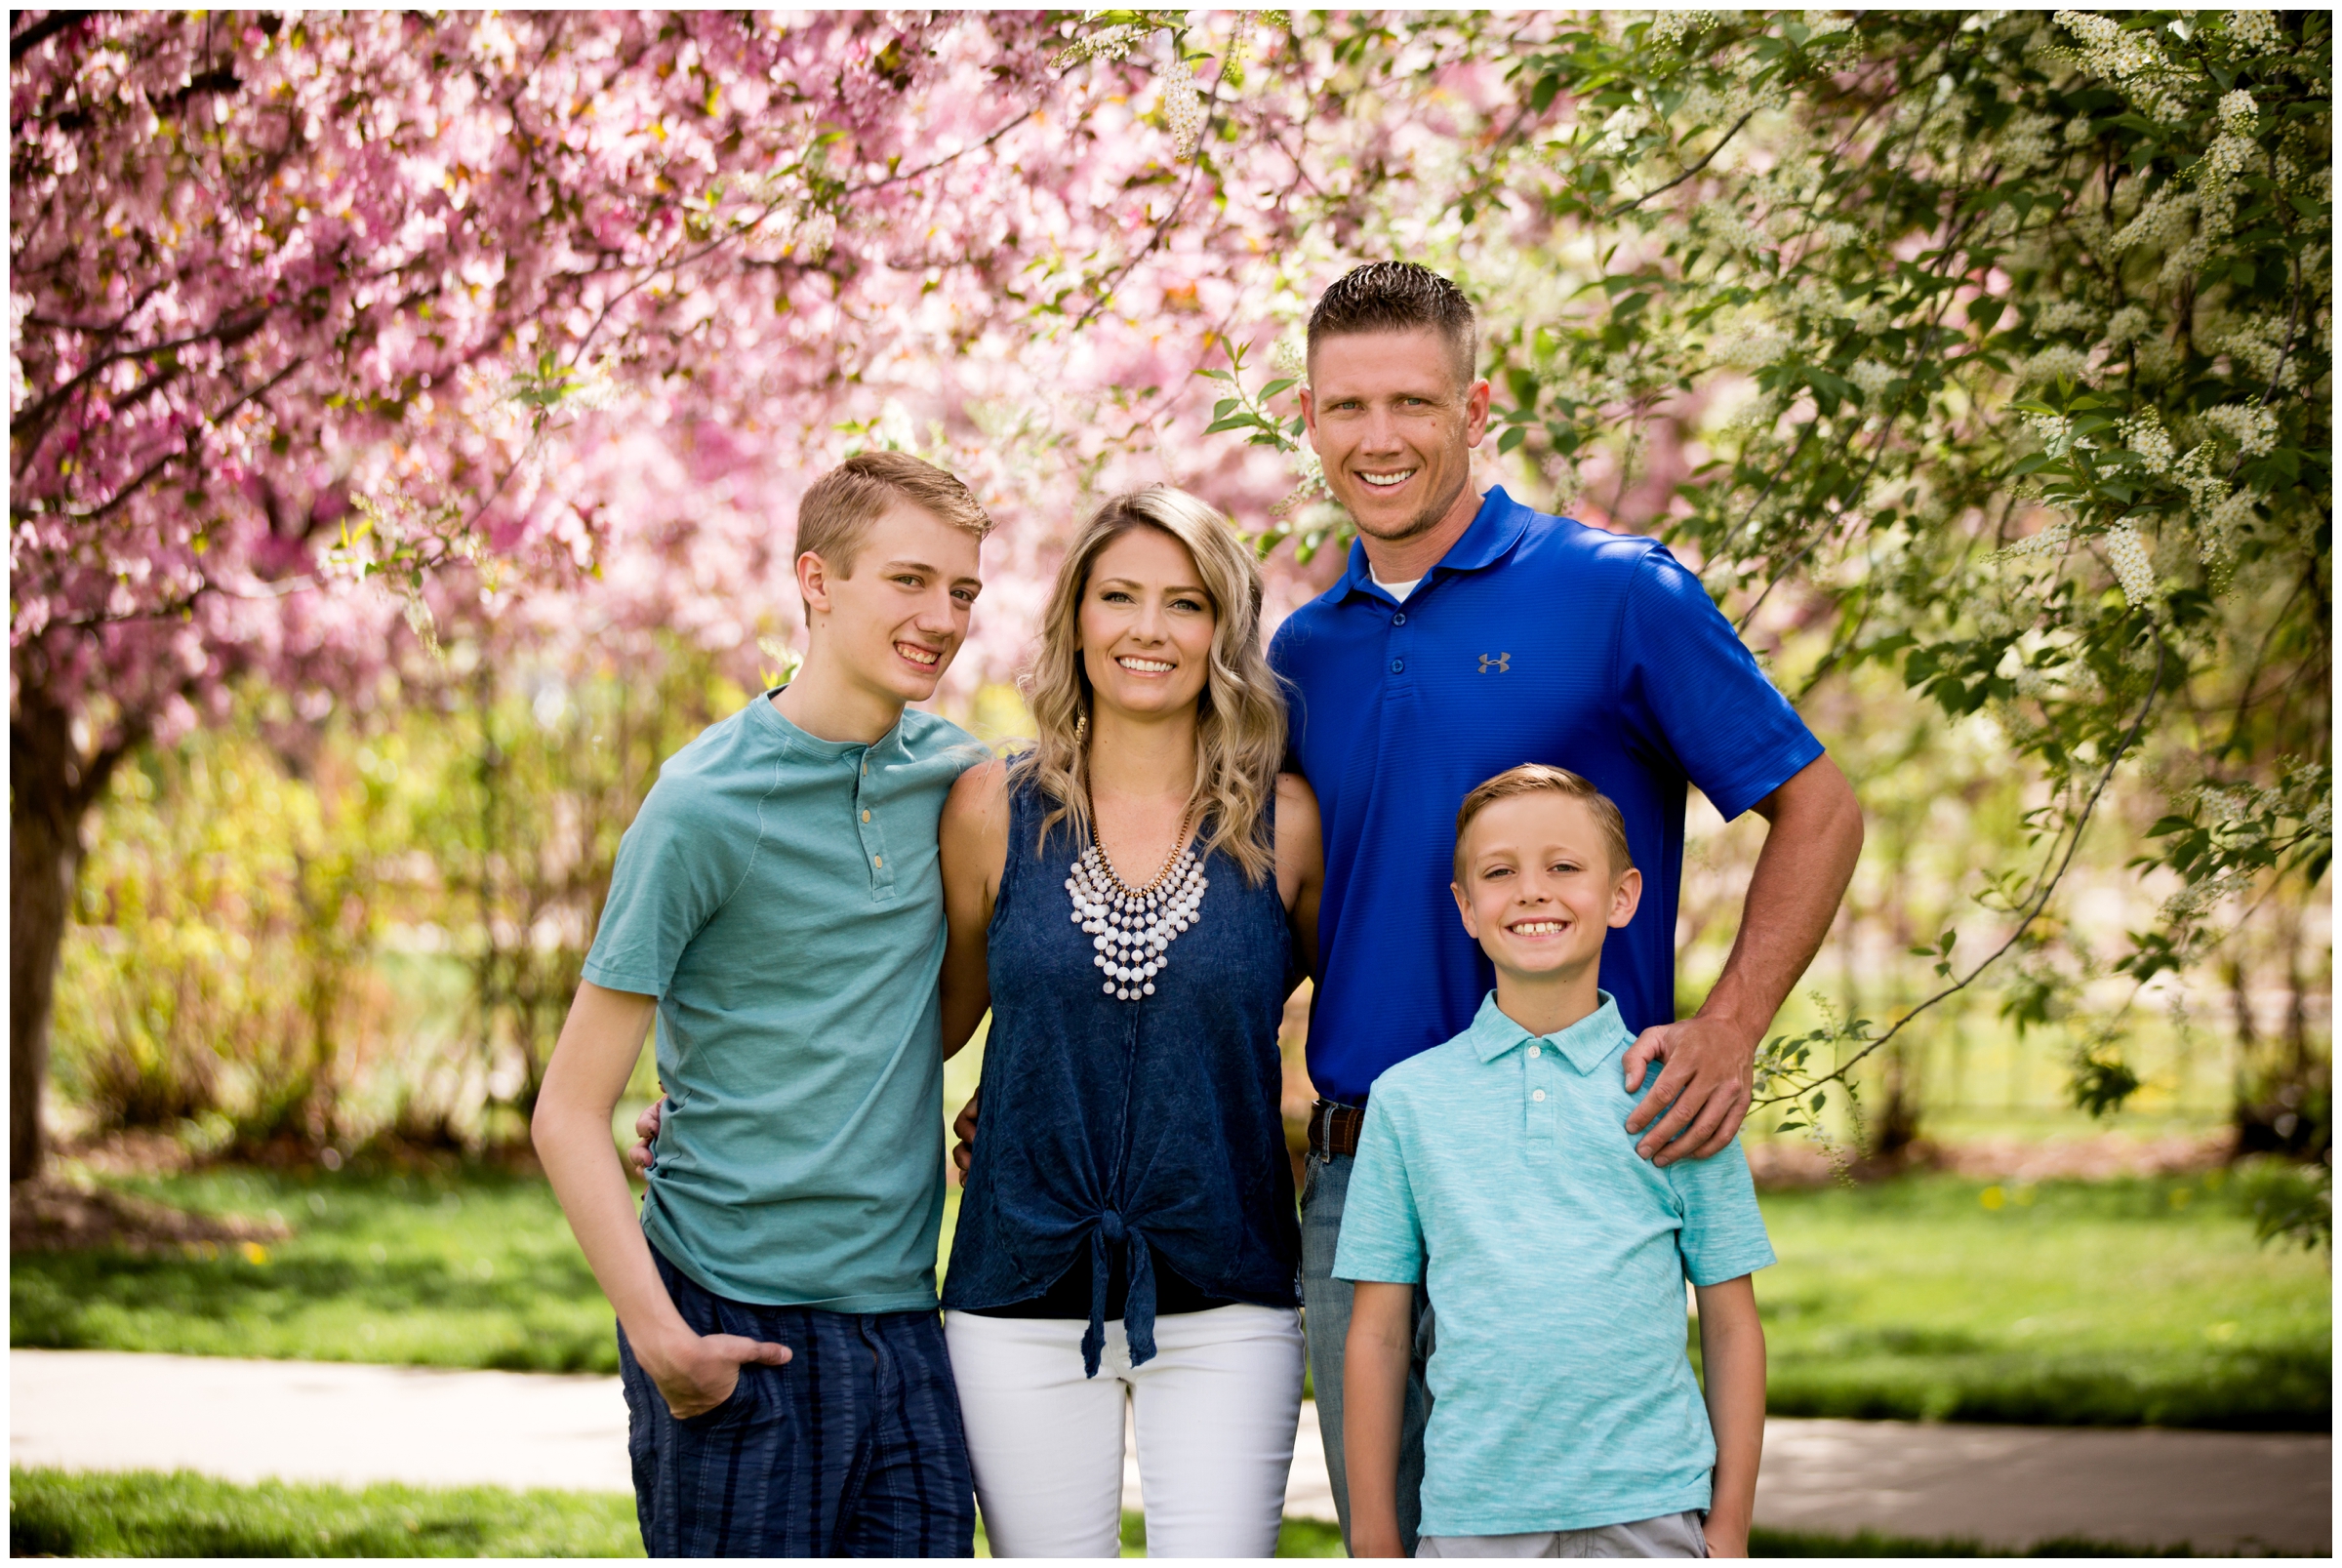 Longmont CO family portraits at Roosevelt Park with cherry blossoms by Colorado photographer Plum Pretty Photography